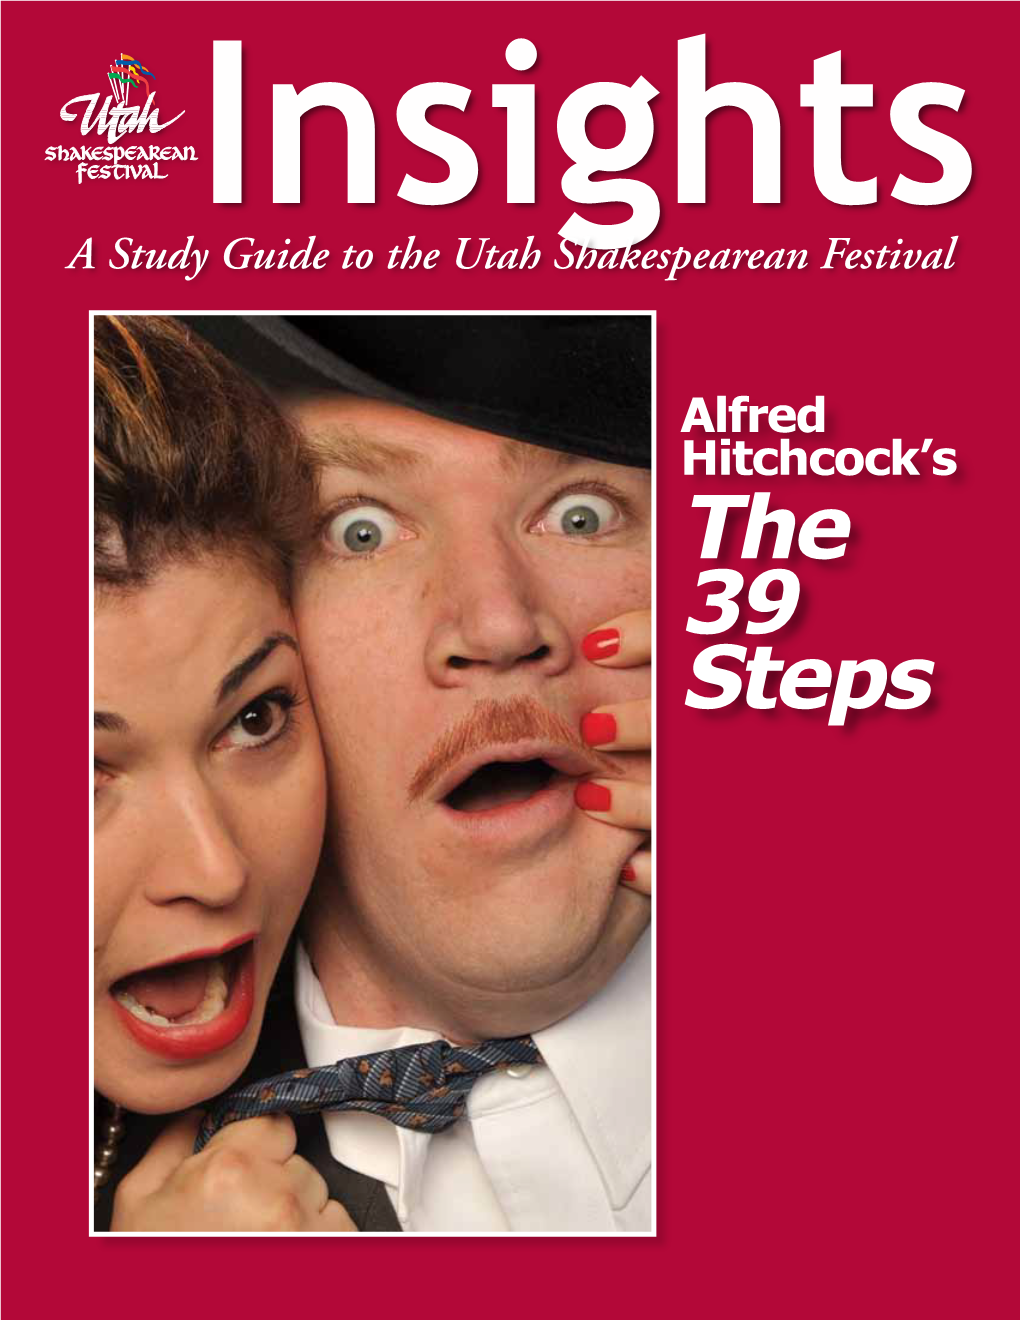 The 39 Steps the Articles in This Study Guide Are Not Meant to Mirror Or Interpret Any Productions at the Utah Shakespearean Festival